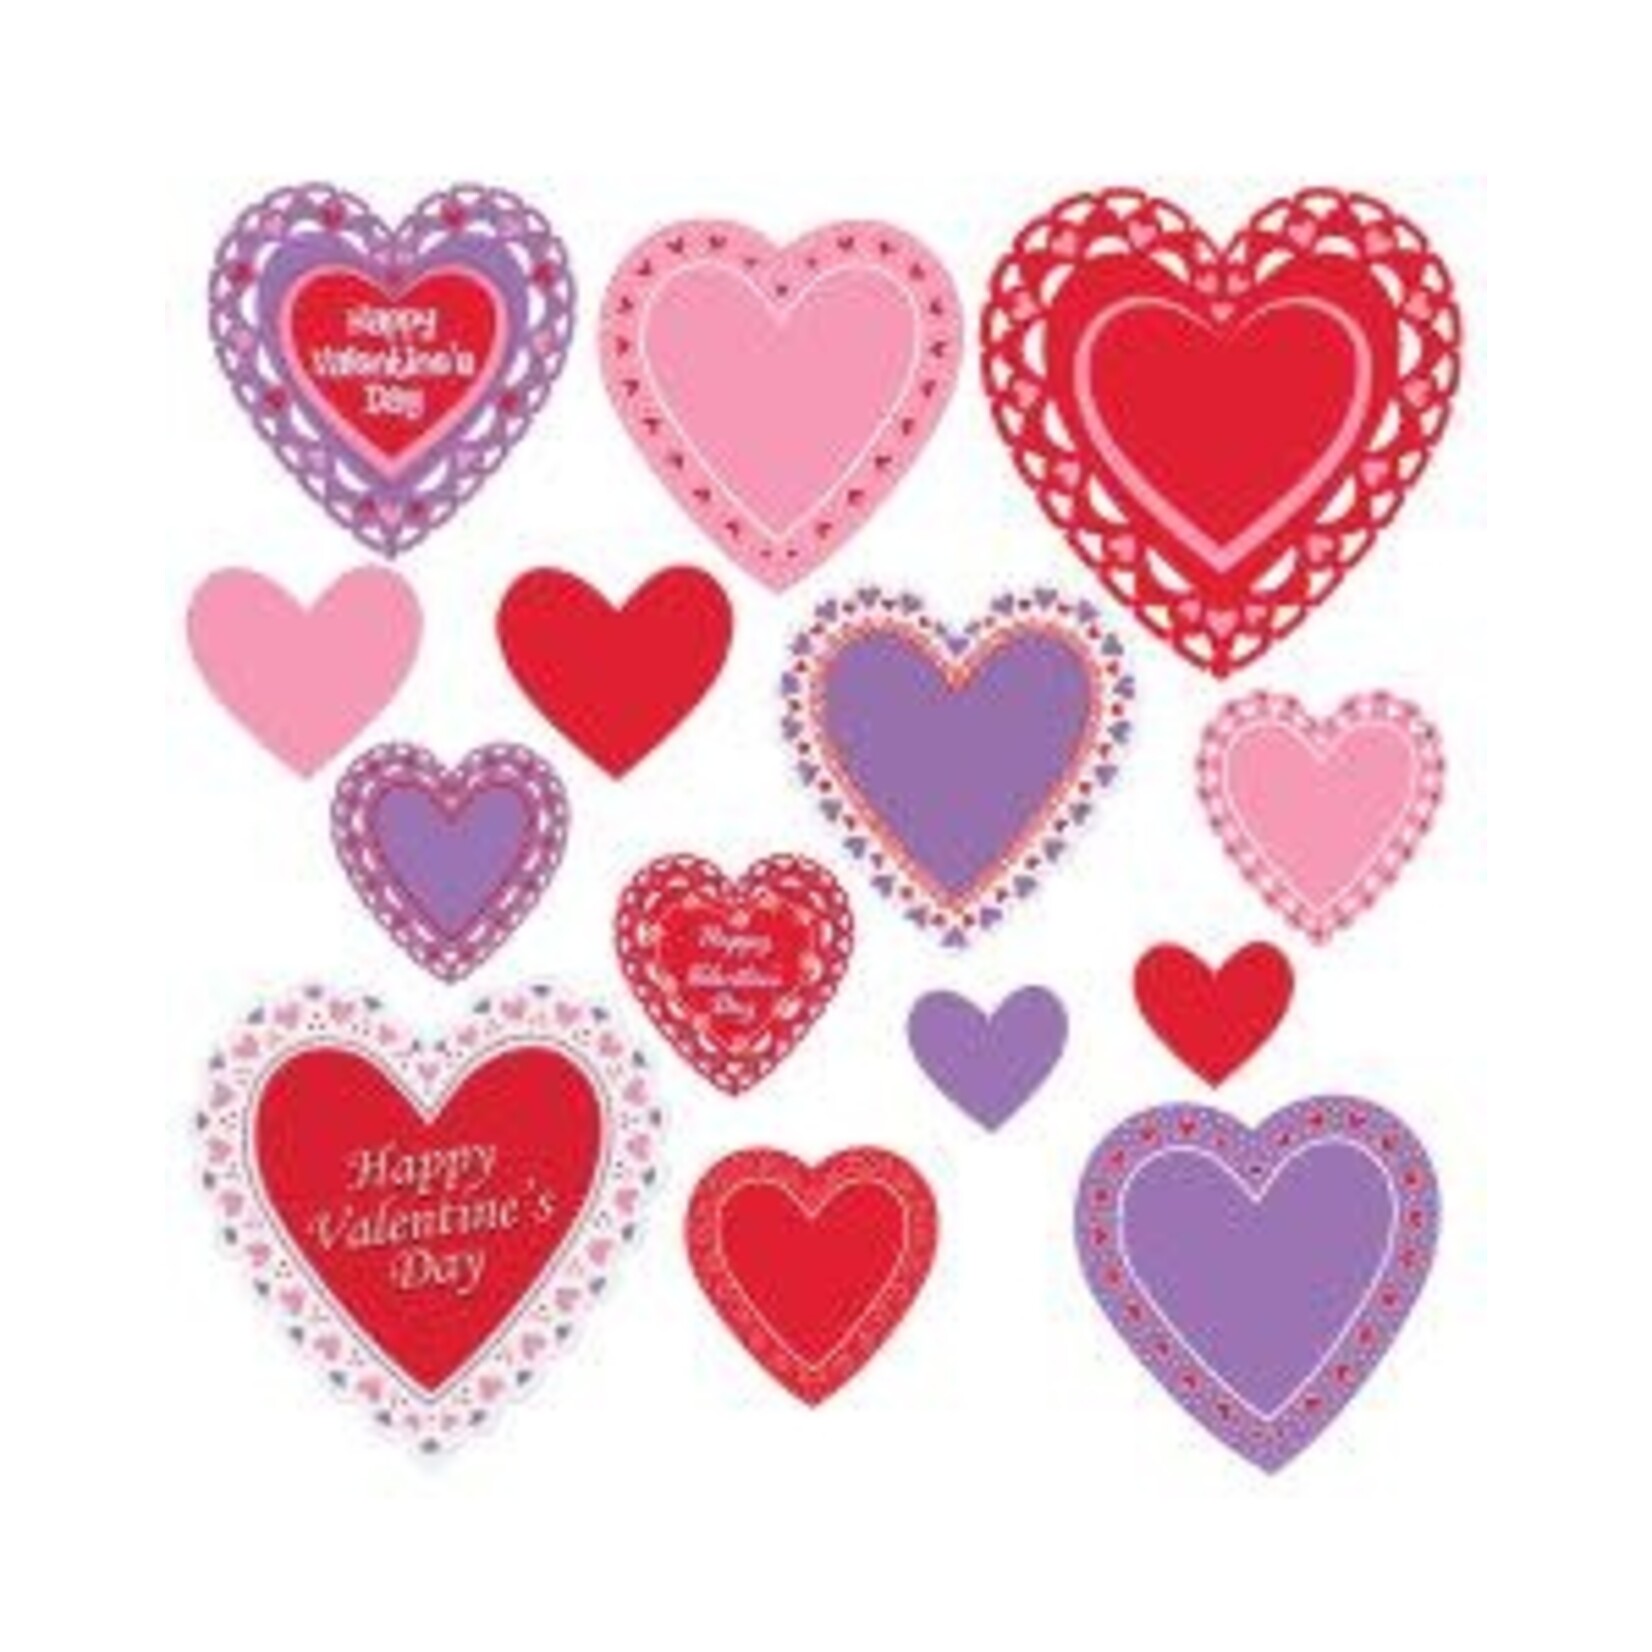 Beistle Valentine's Day Heart Shaped Cutouts - 14ct.